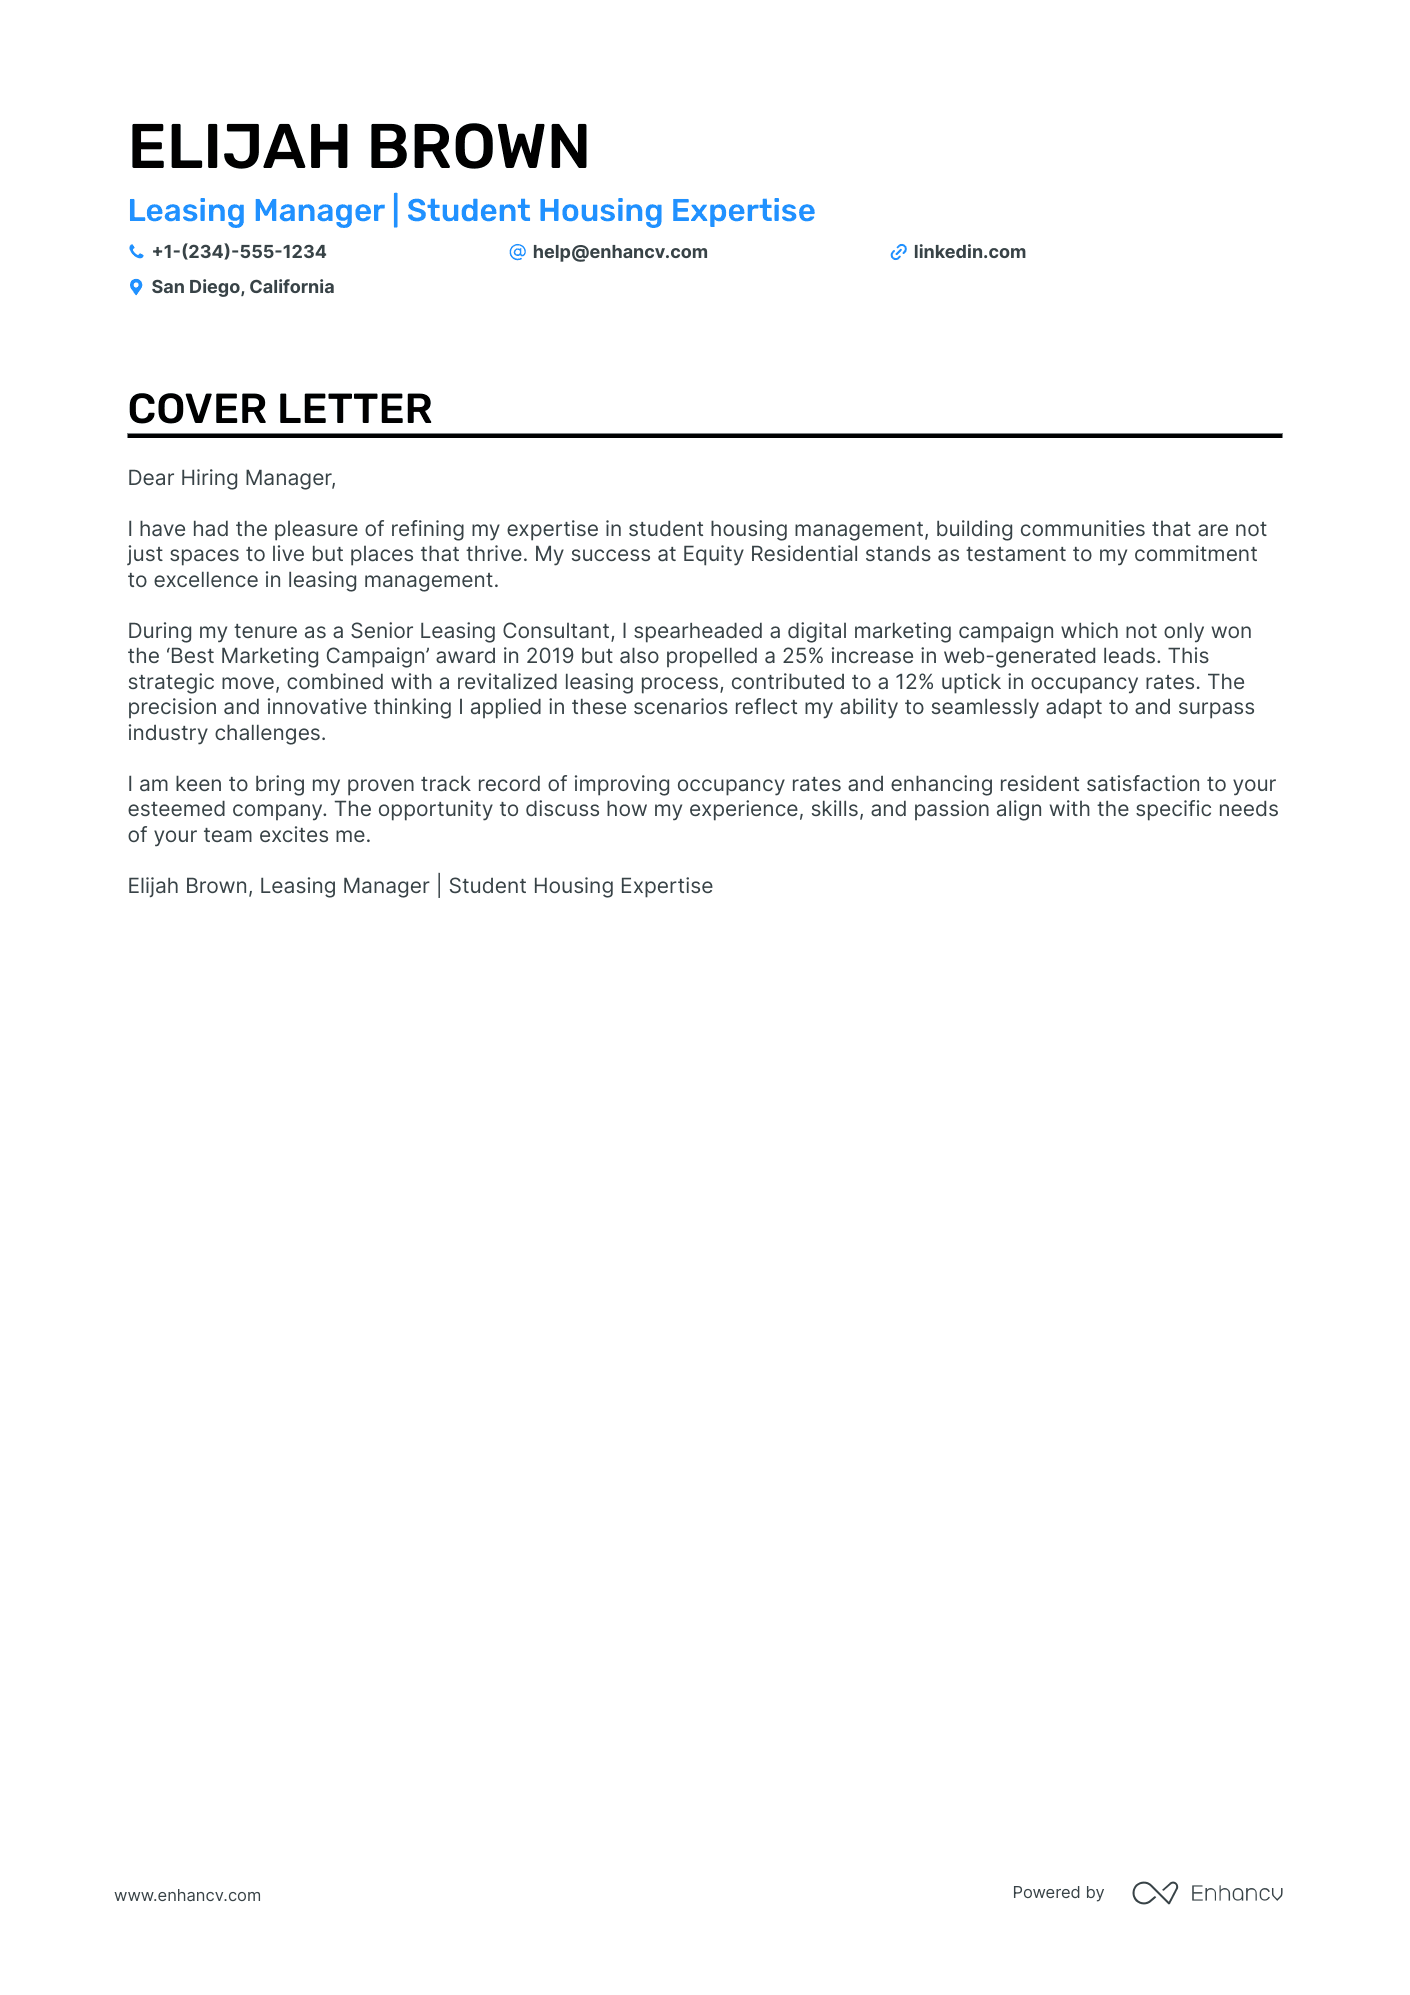 cover letter for property manager position